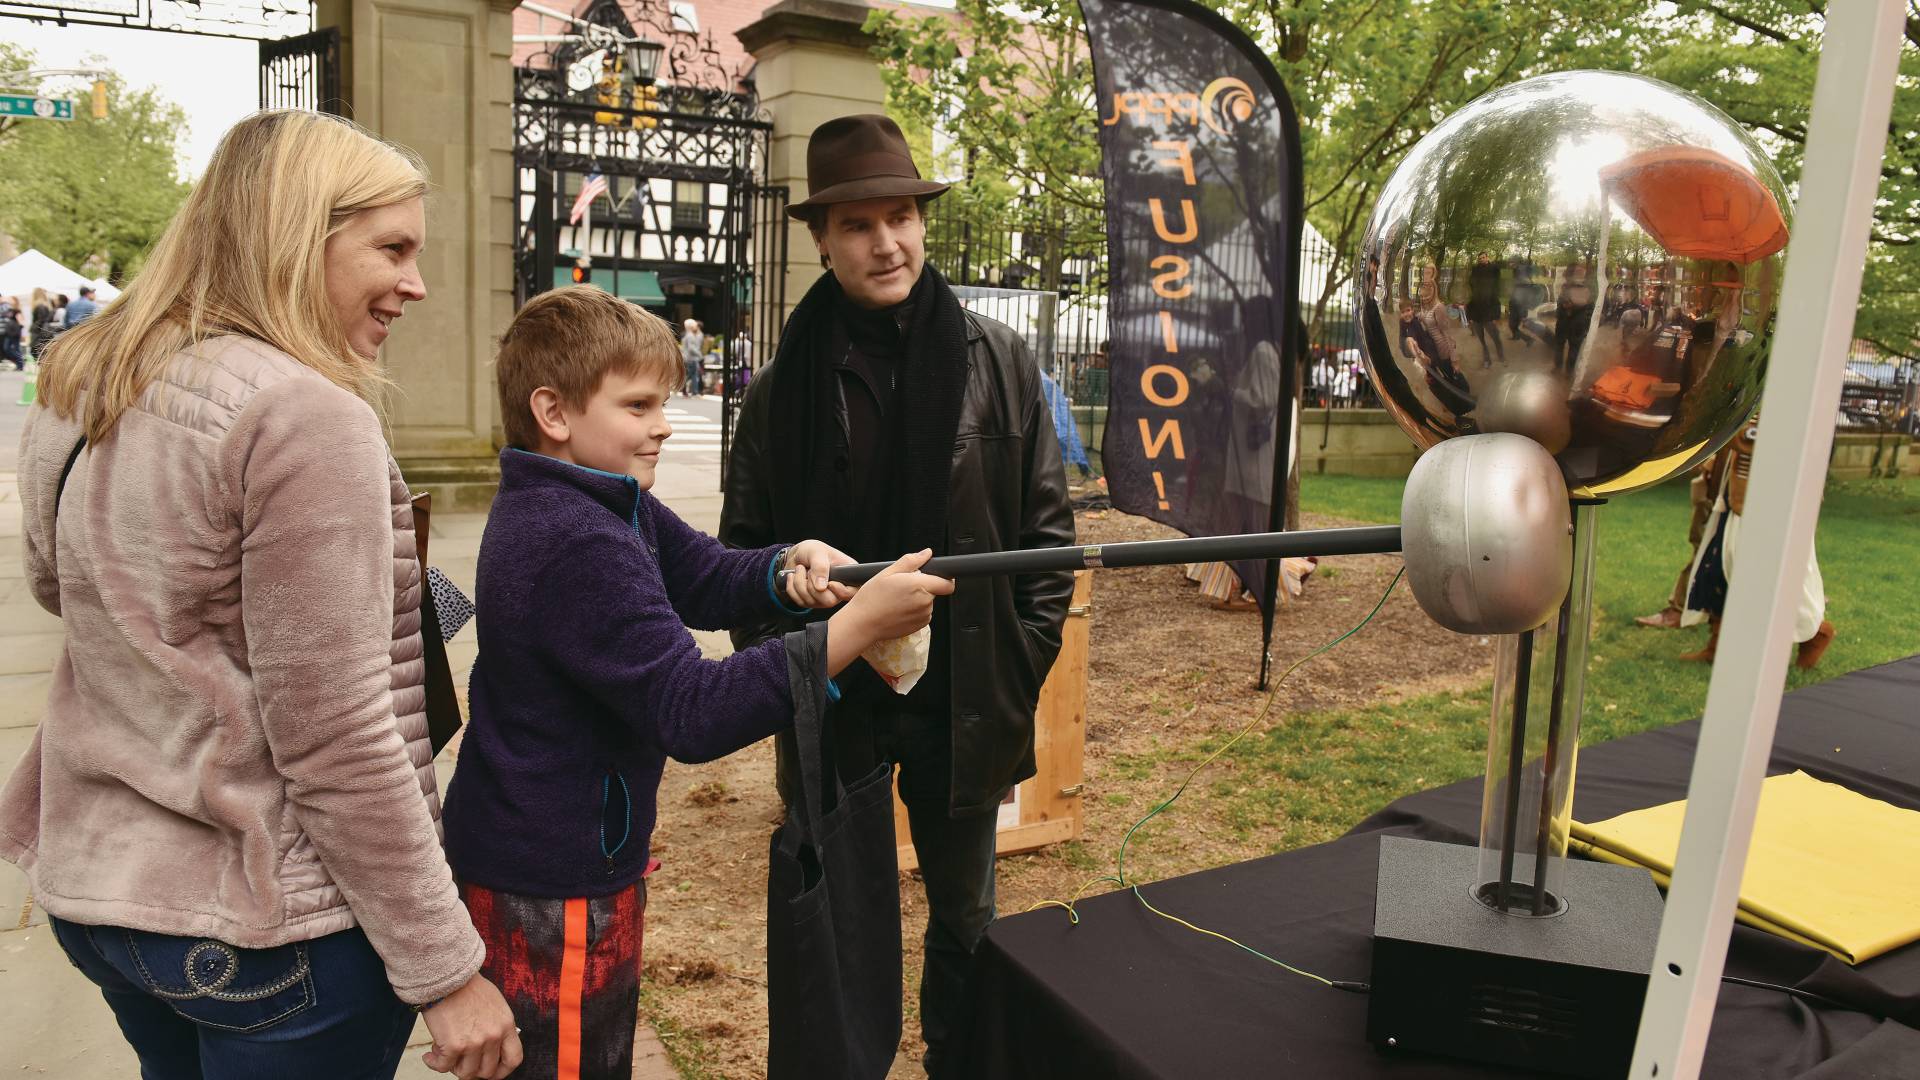 A boy holds a stick with a silver colored ball at the end close to to base of a silver sphere while his mother and a man watch on